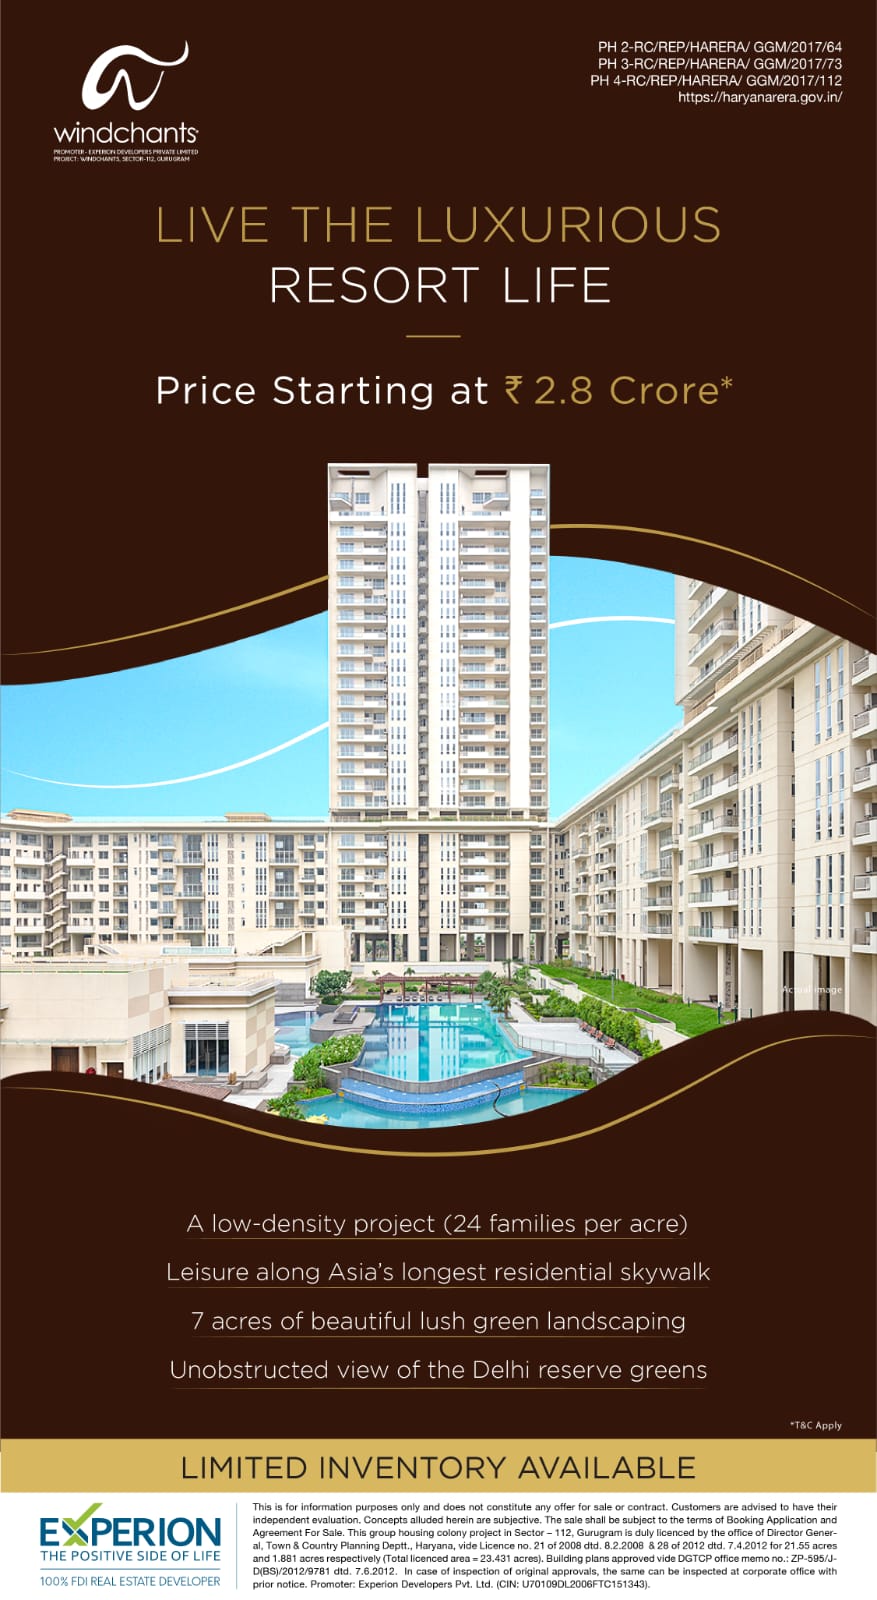 Limited inventory available at Experion Windchants, Gurgaon Update